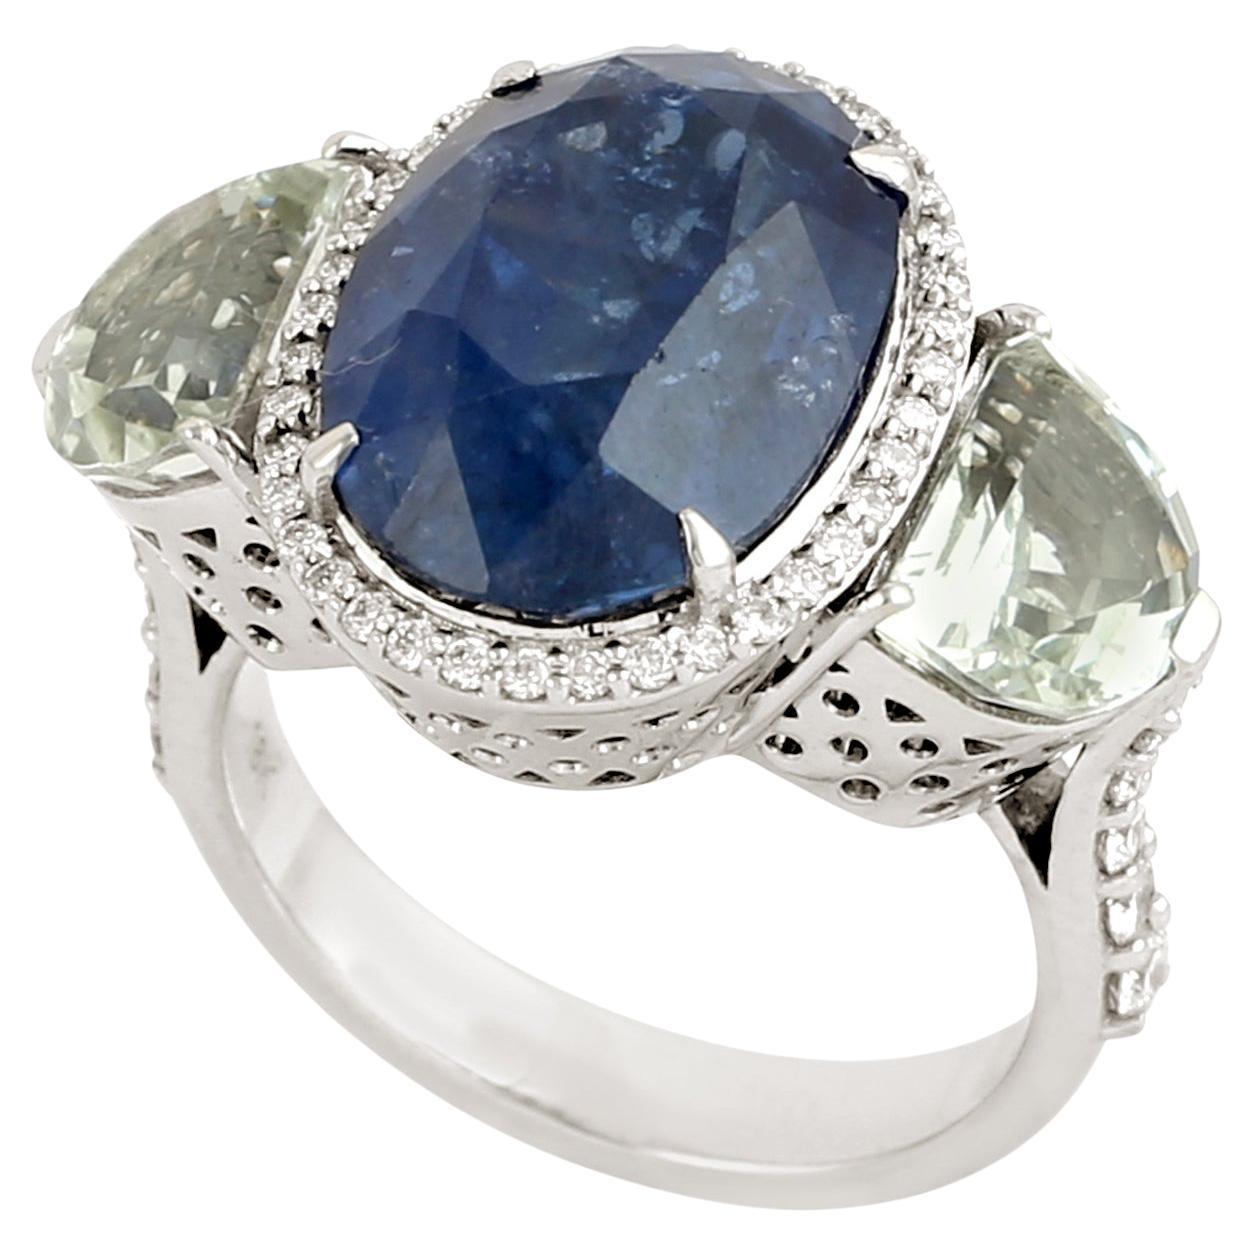 Oval Shaped Blue Sapphire Cocktail Ring With White Amethyst